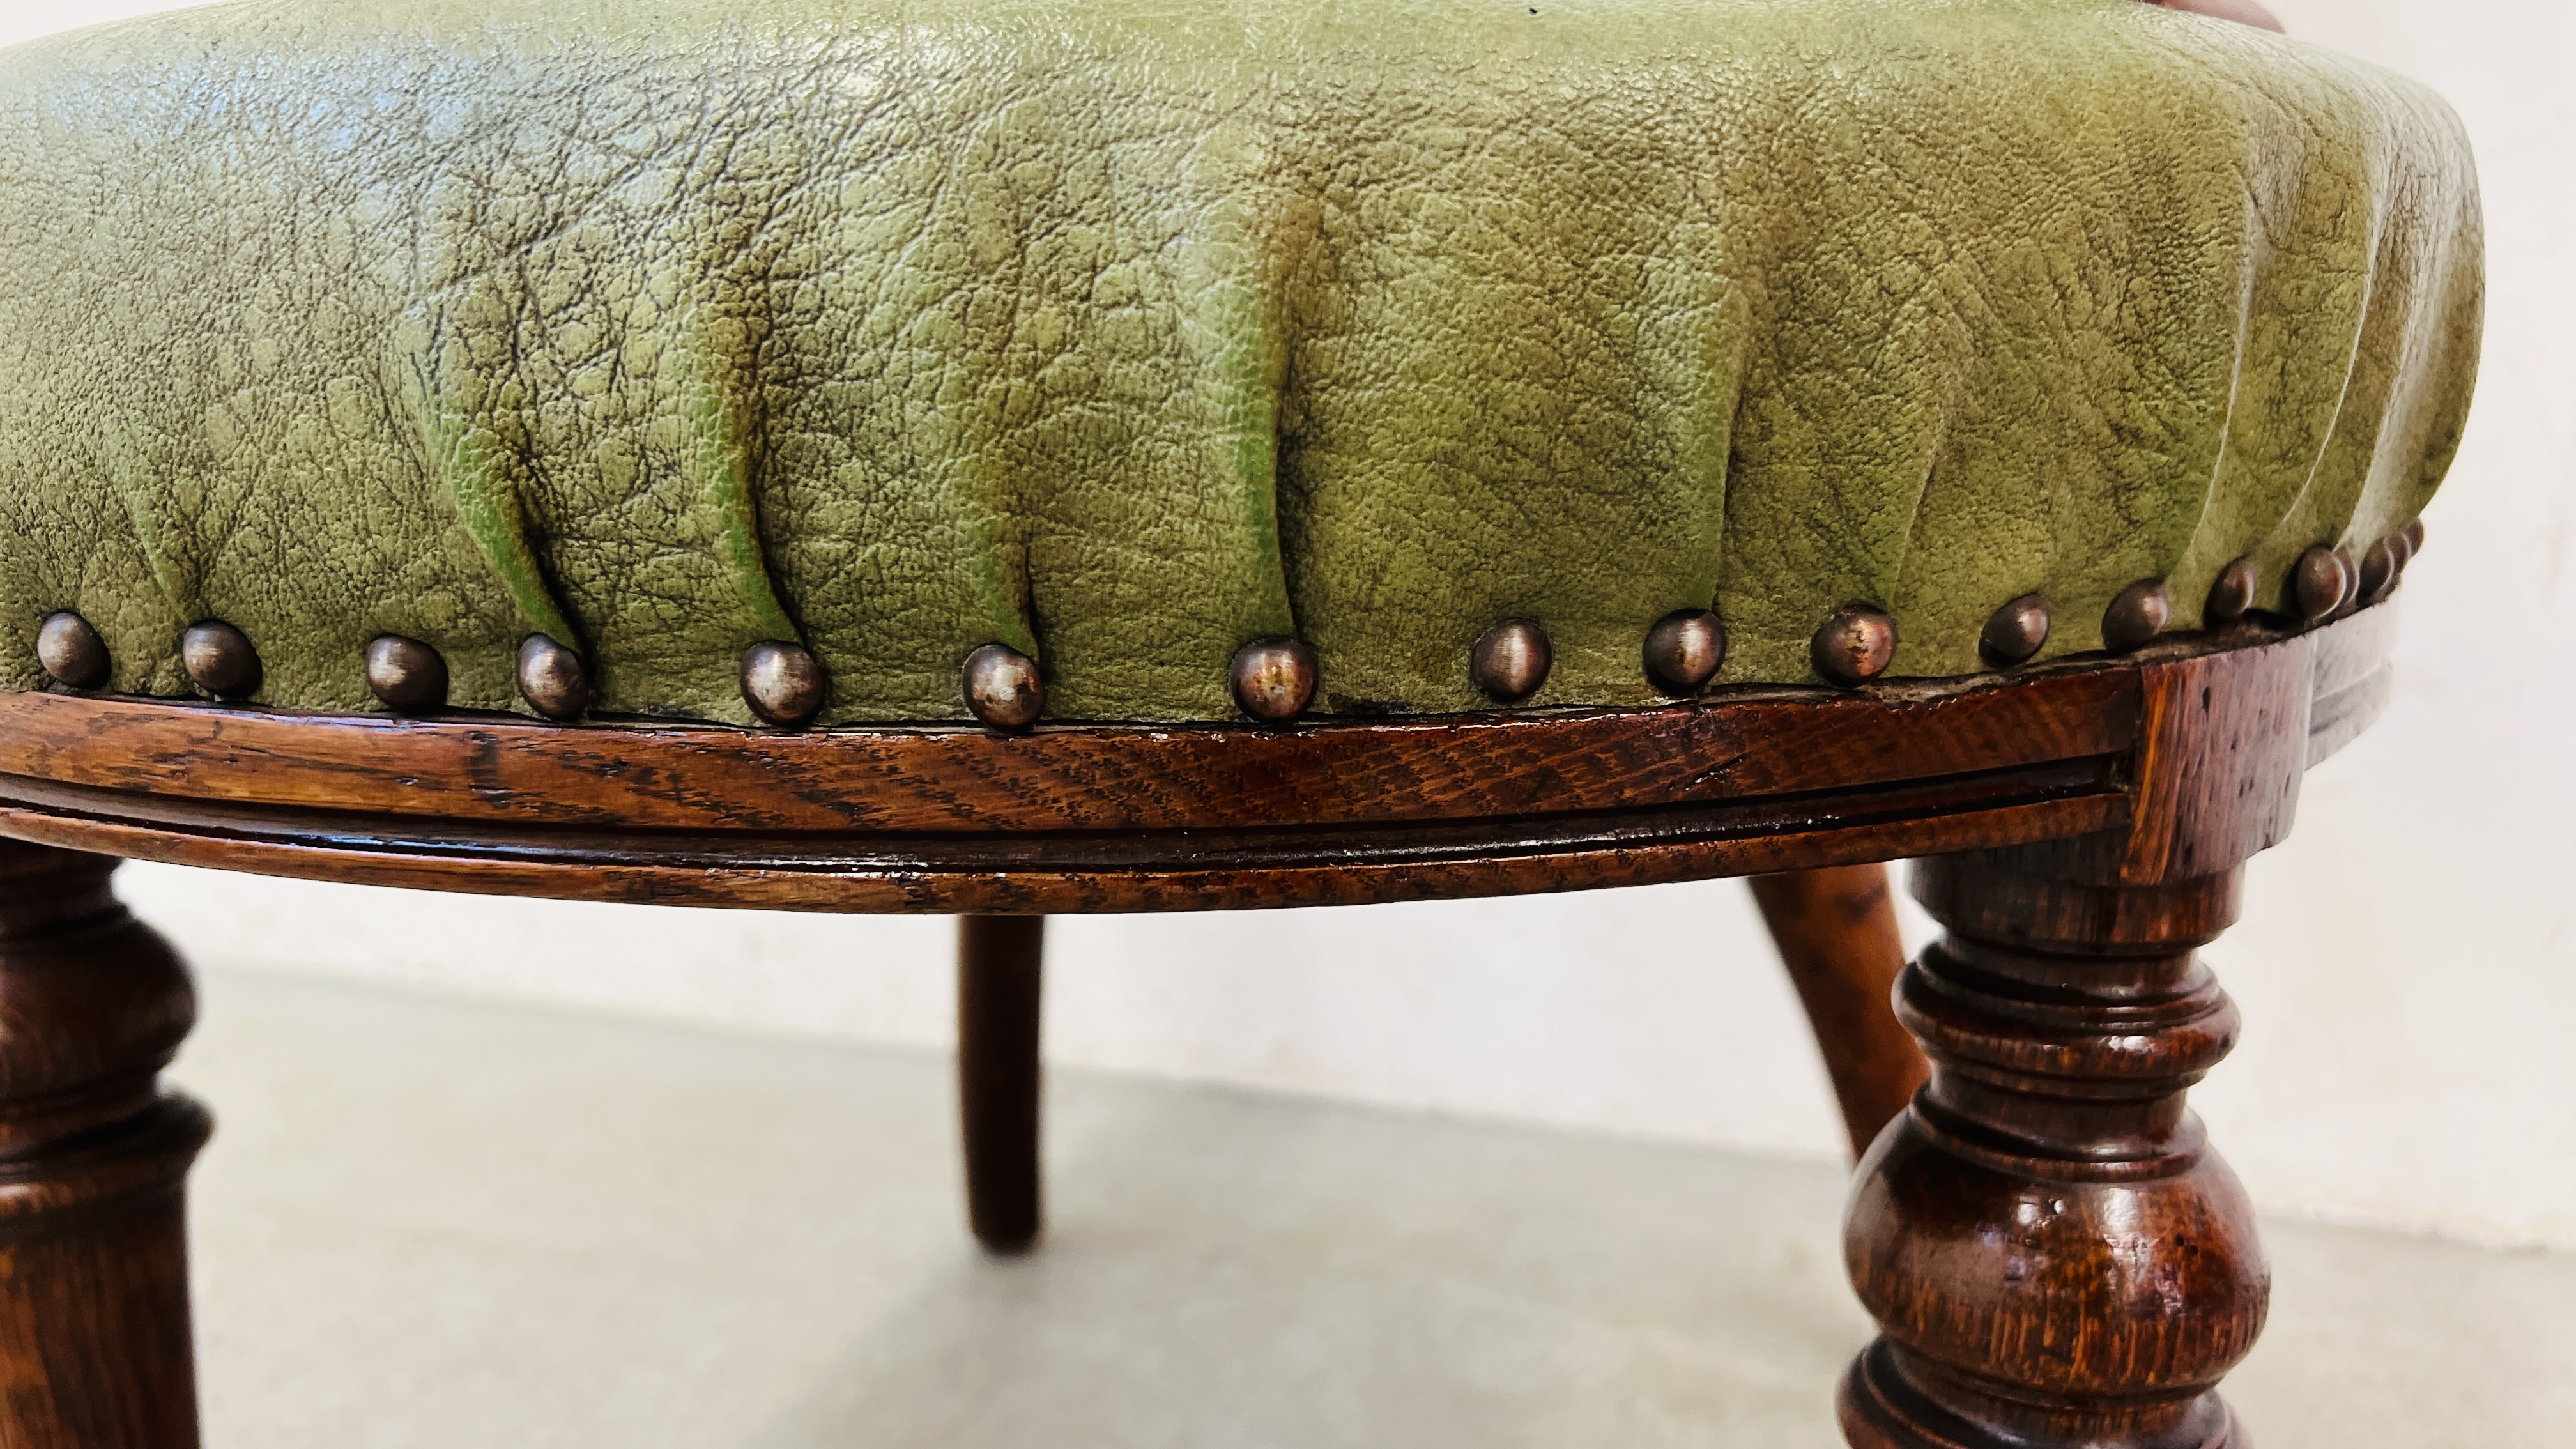 AN ANTIQUE OAK FRAMED TUB CHAIR WITH BOTTLE GREEN LEATHER UPHOLSTERY AND STUD DETAILING. - Image 6 of 7